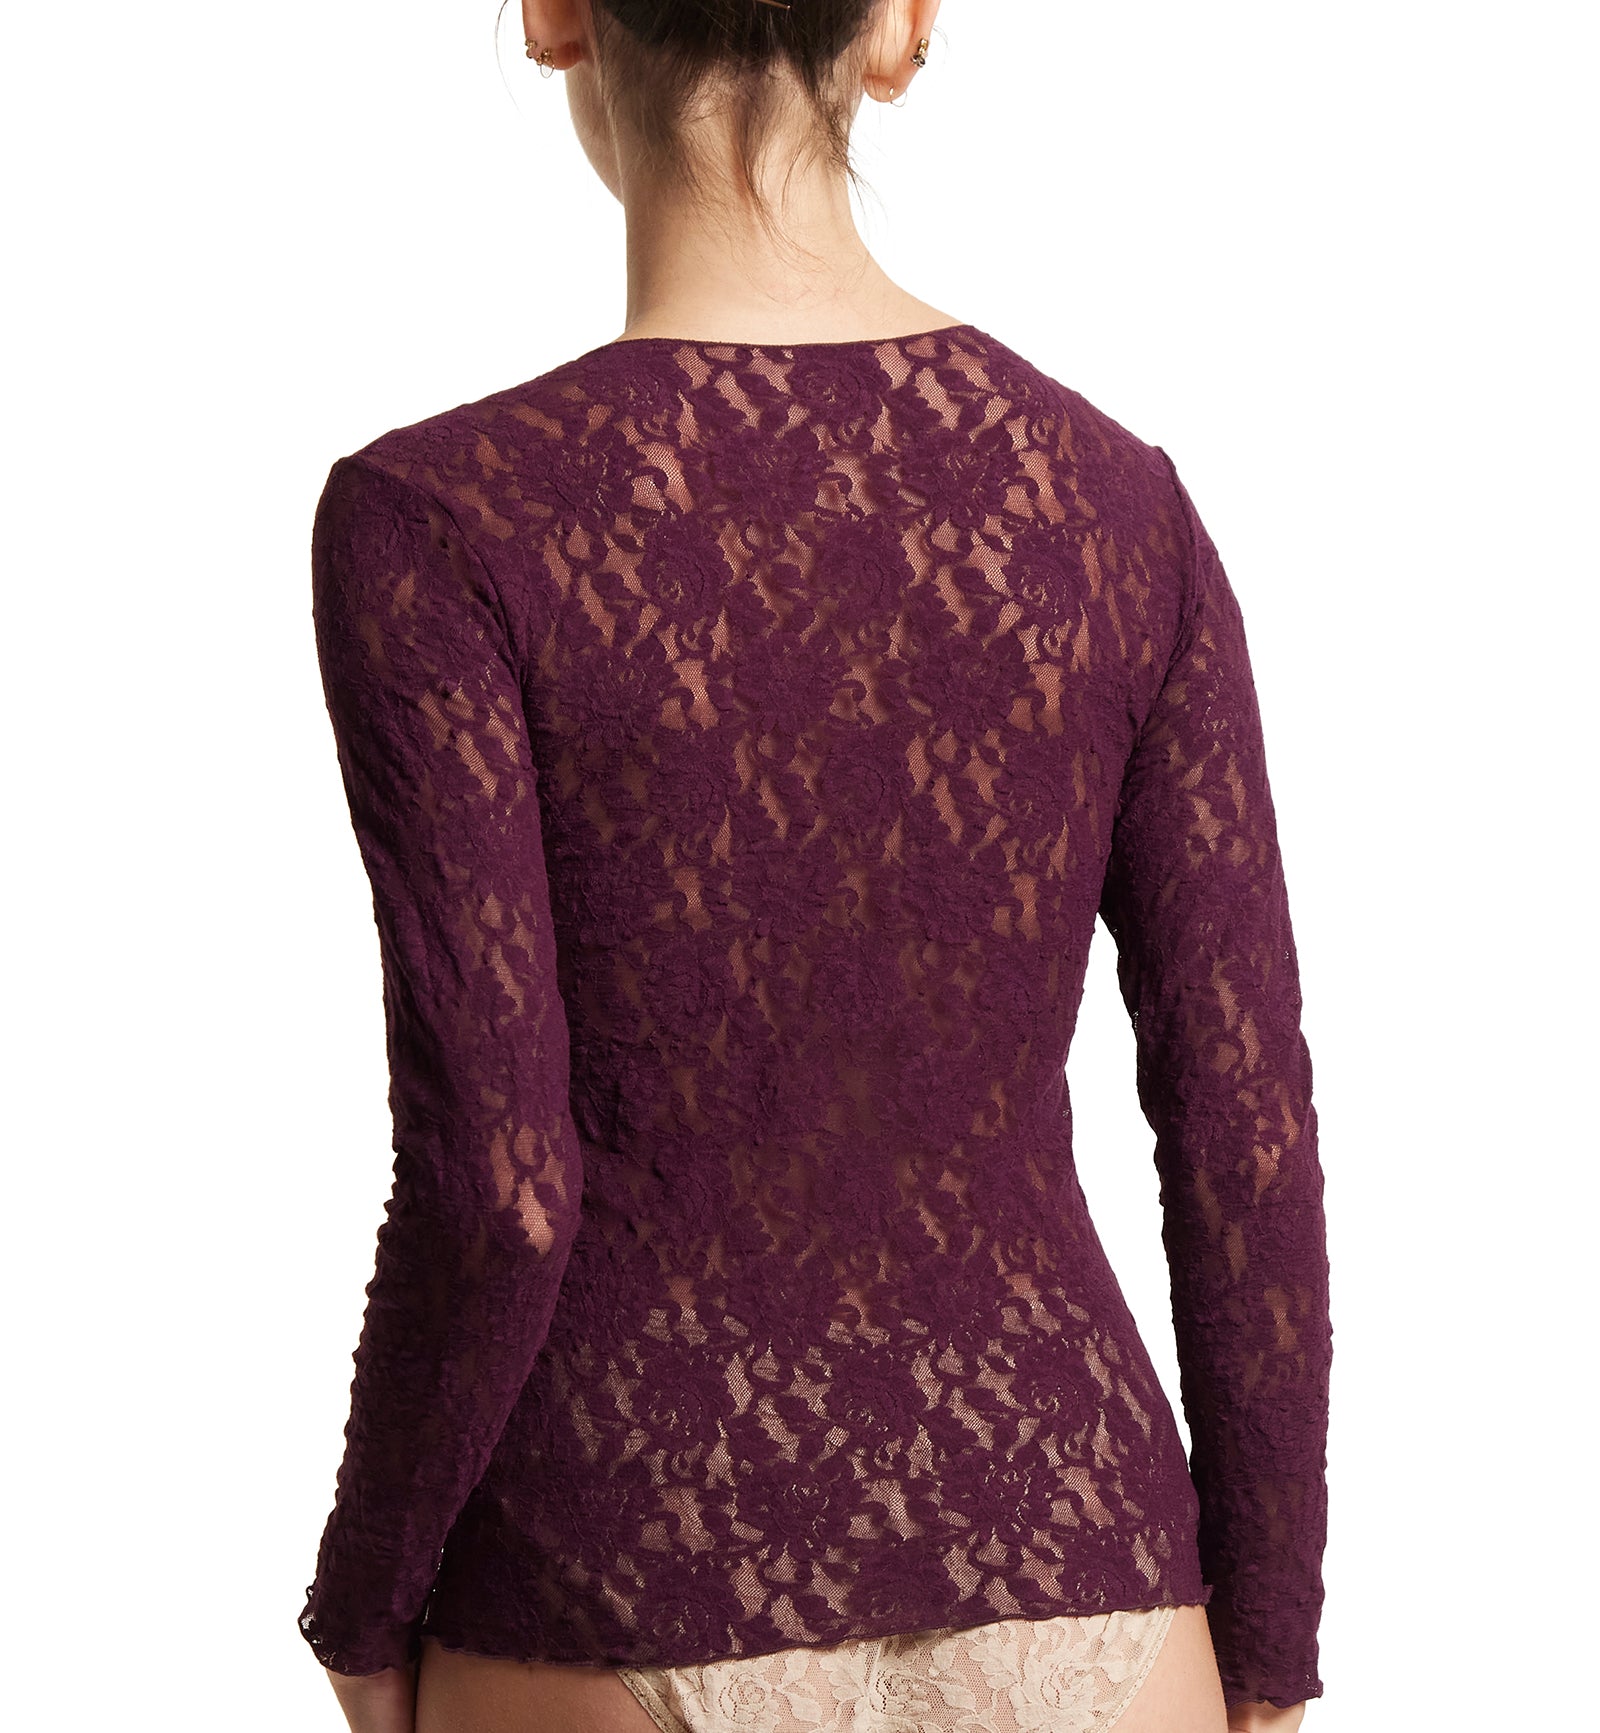 Hanky Panky Signature Lace Unlined Long Sleeve Top (128L),Large,Dried Cherry - Dried Cherry,Large